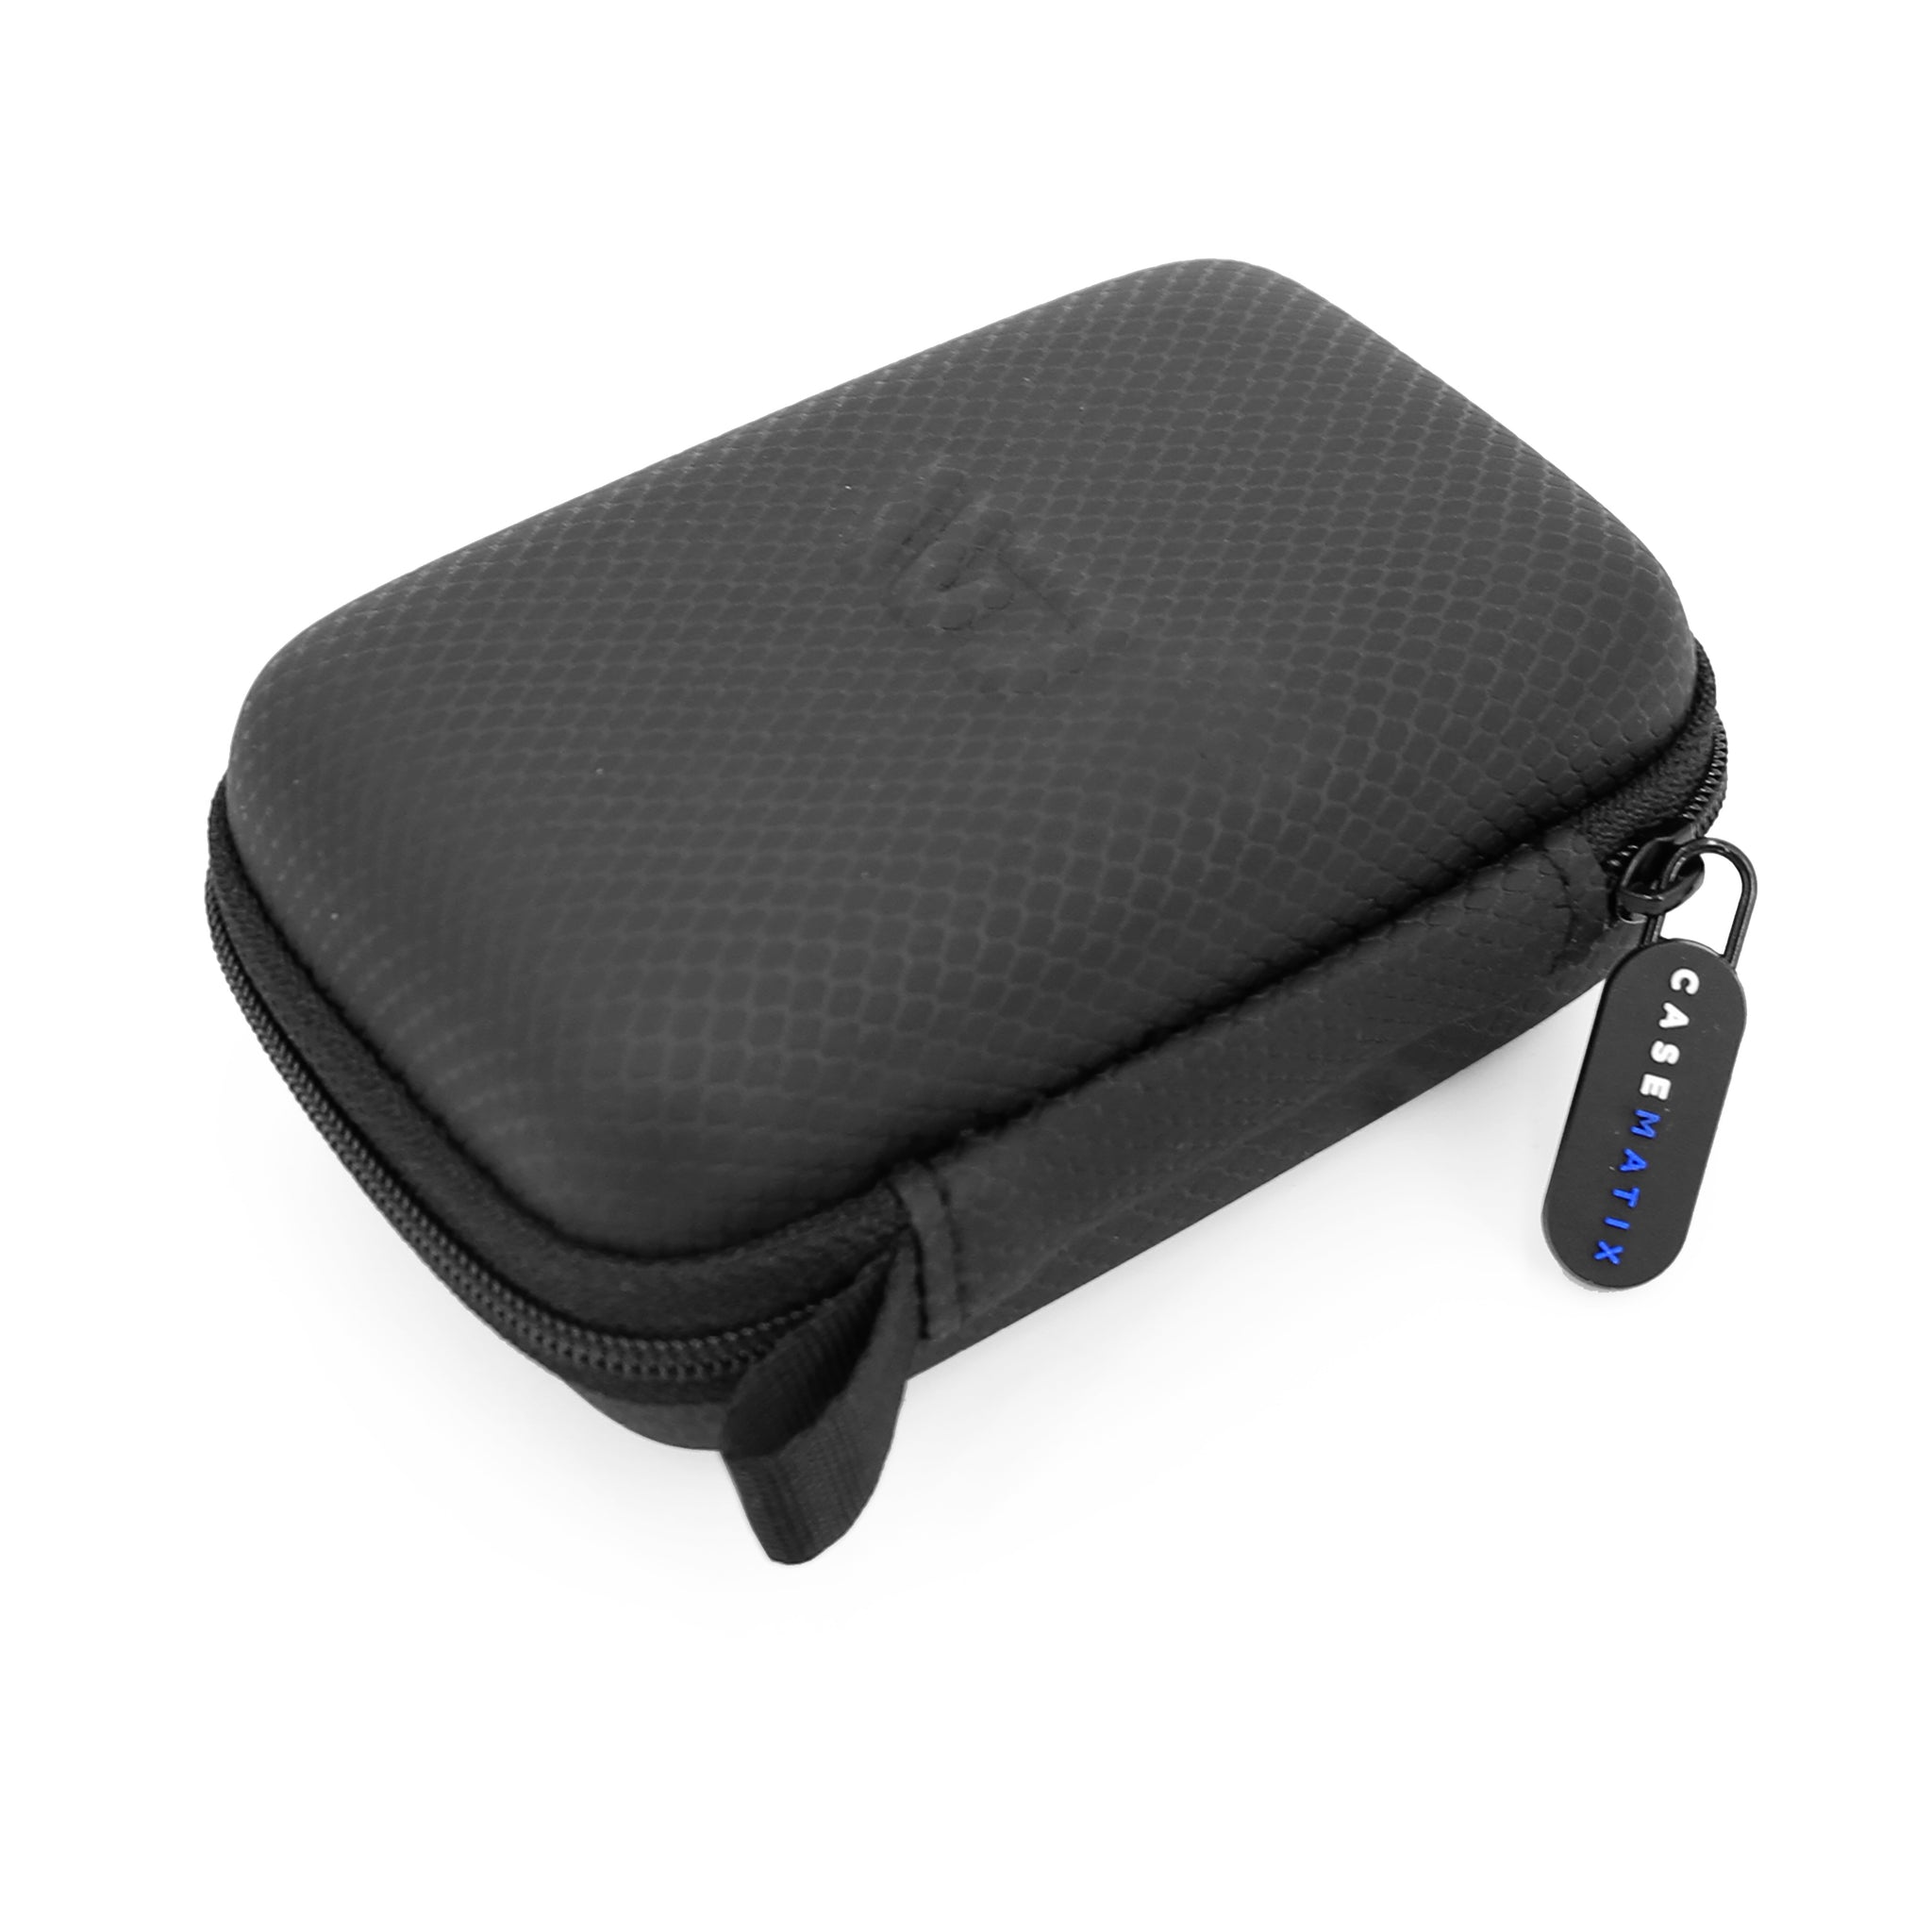 Casematix Protective Travel Carry Case Fits Qardioarm Wireless Blood  Pressure Monitor and Other Medical Monitoring Accessories Case ONLY 